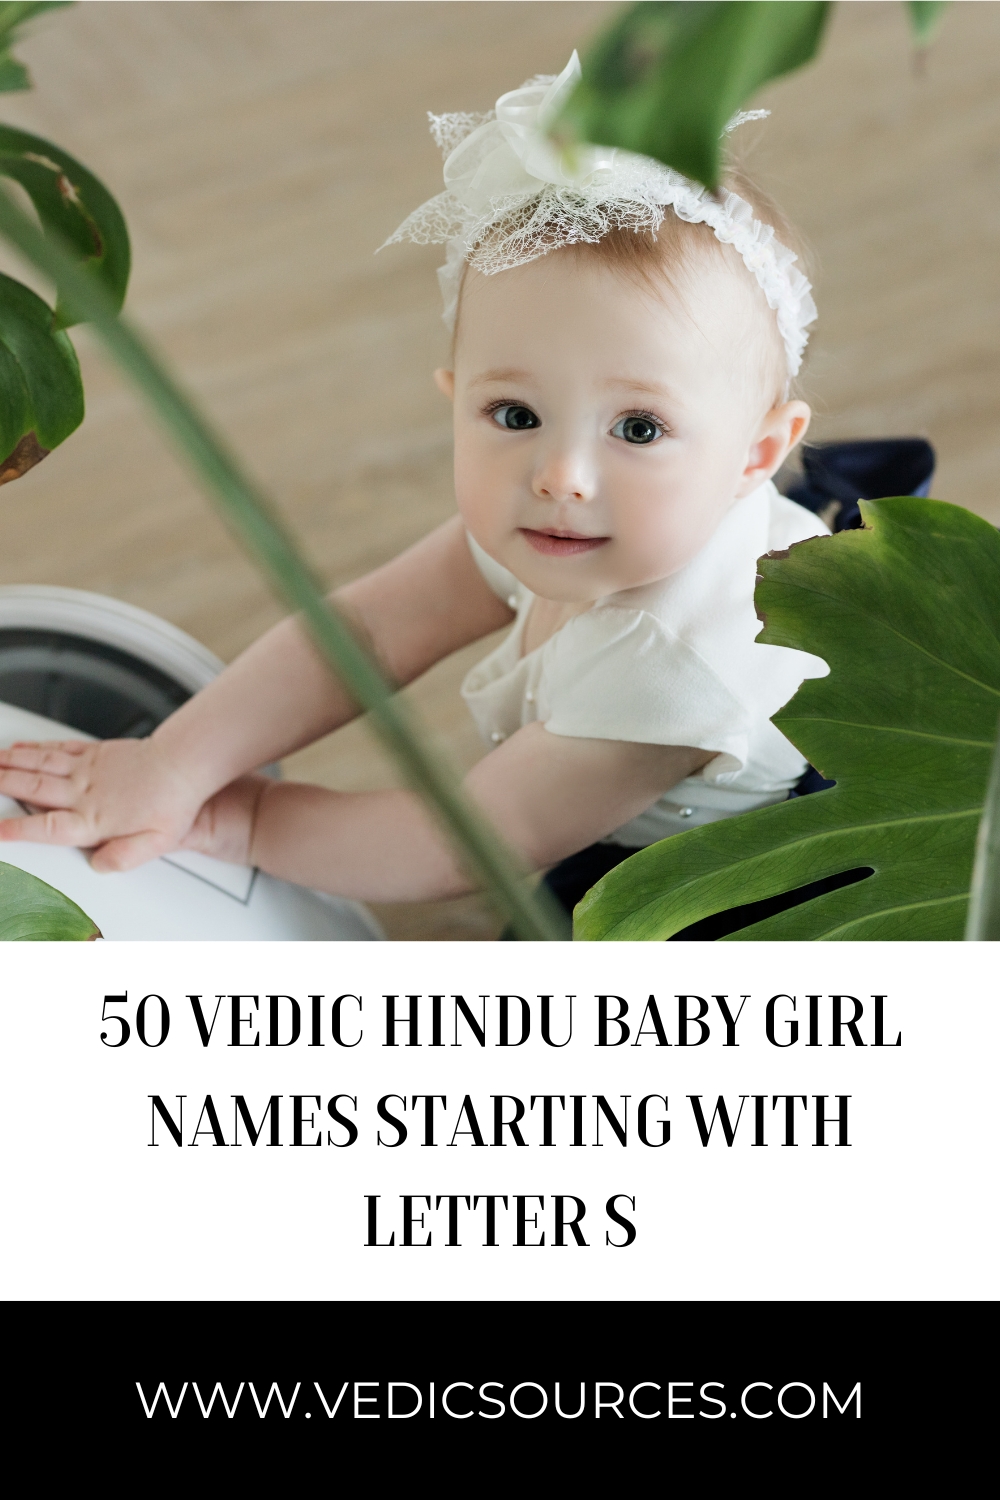 50 Vedic Hindu Baby Girl Names Starting with Letter S